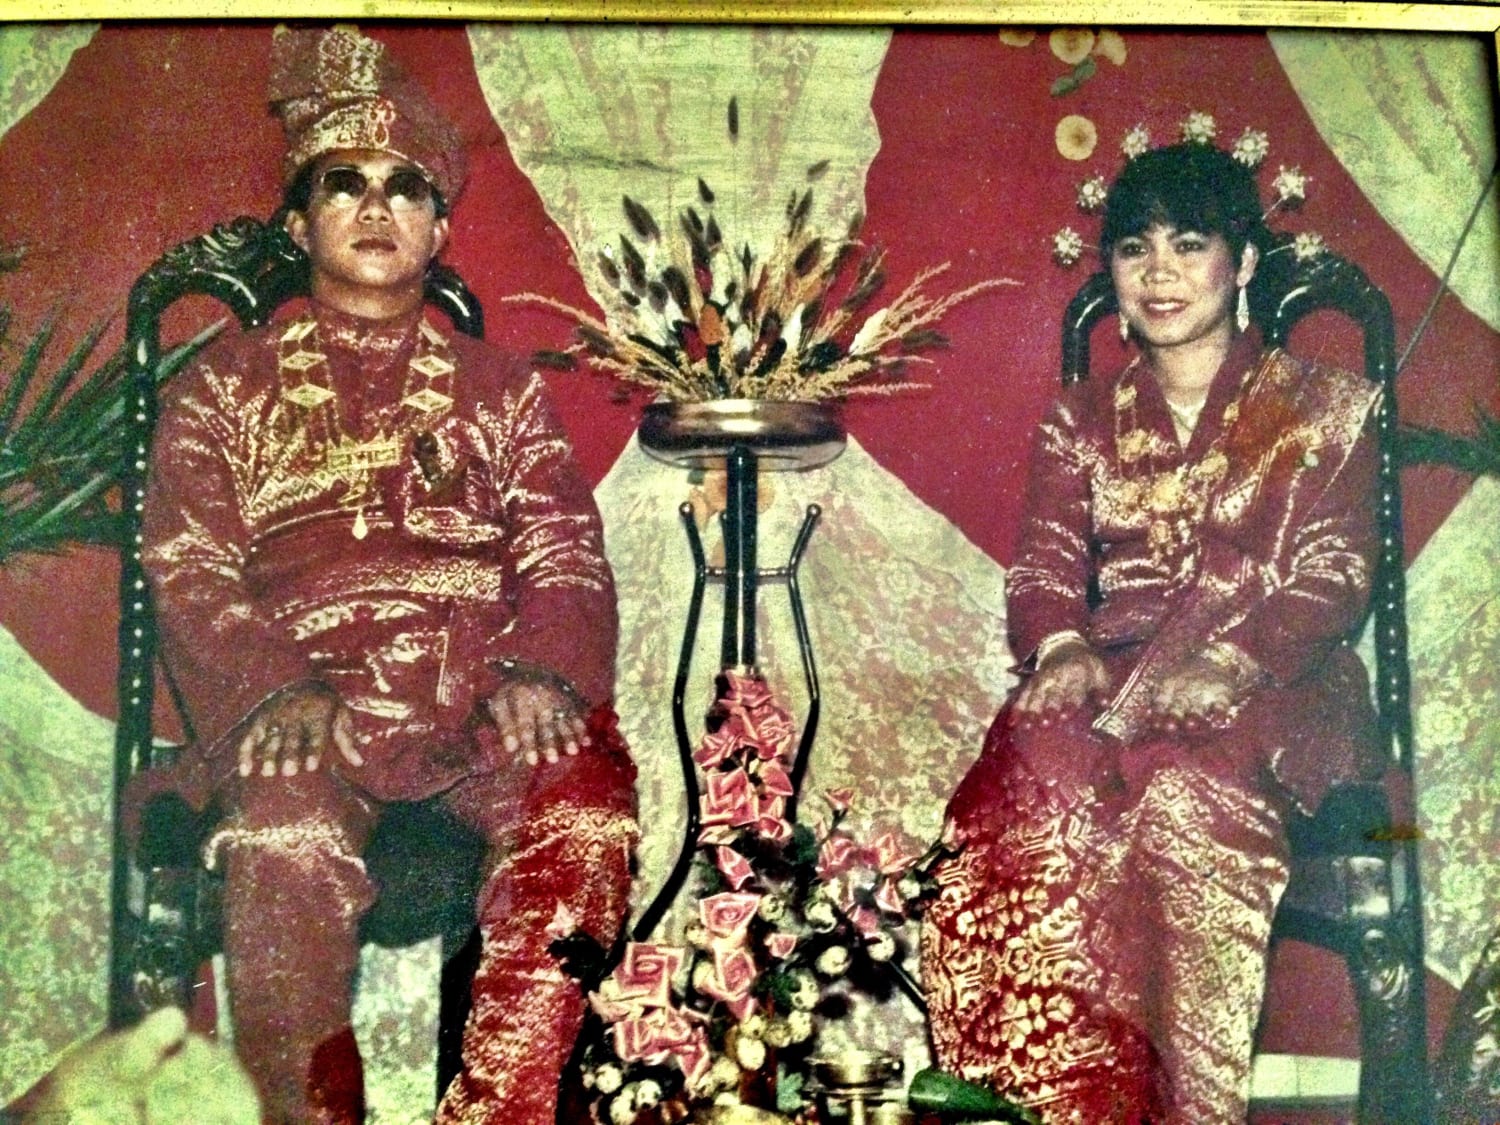 My parents’ Malaysian wedding in 1987